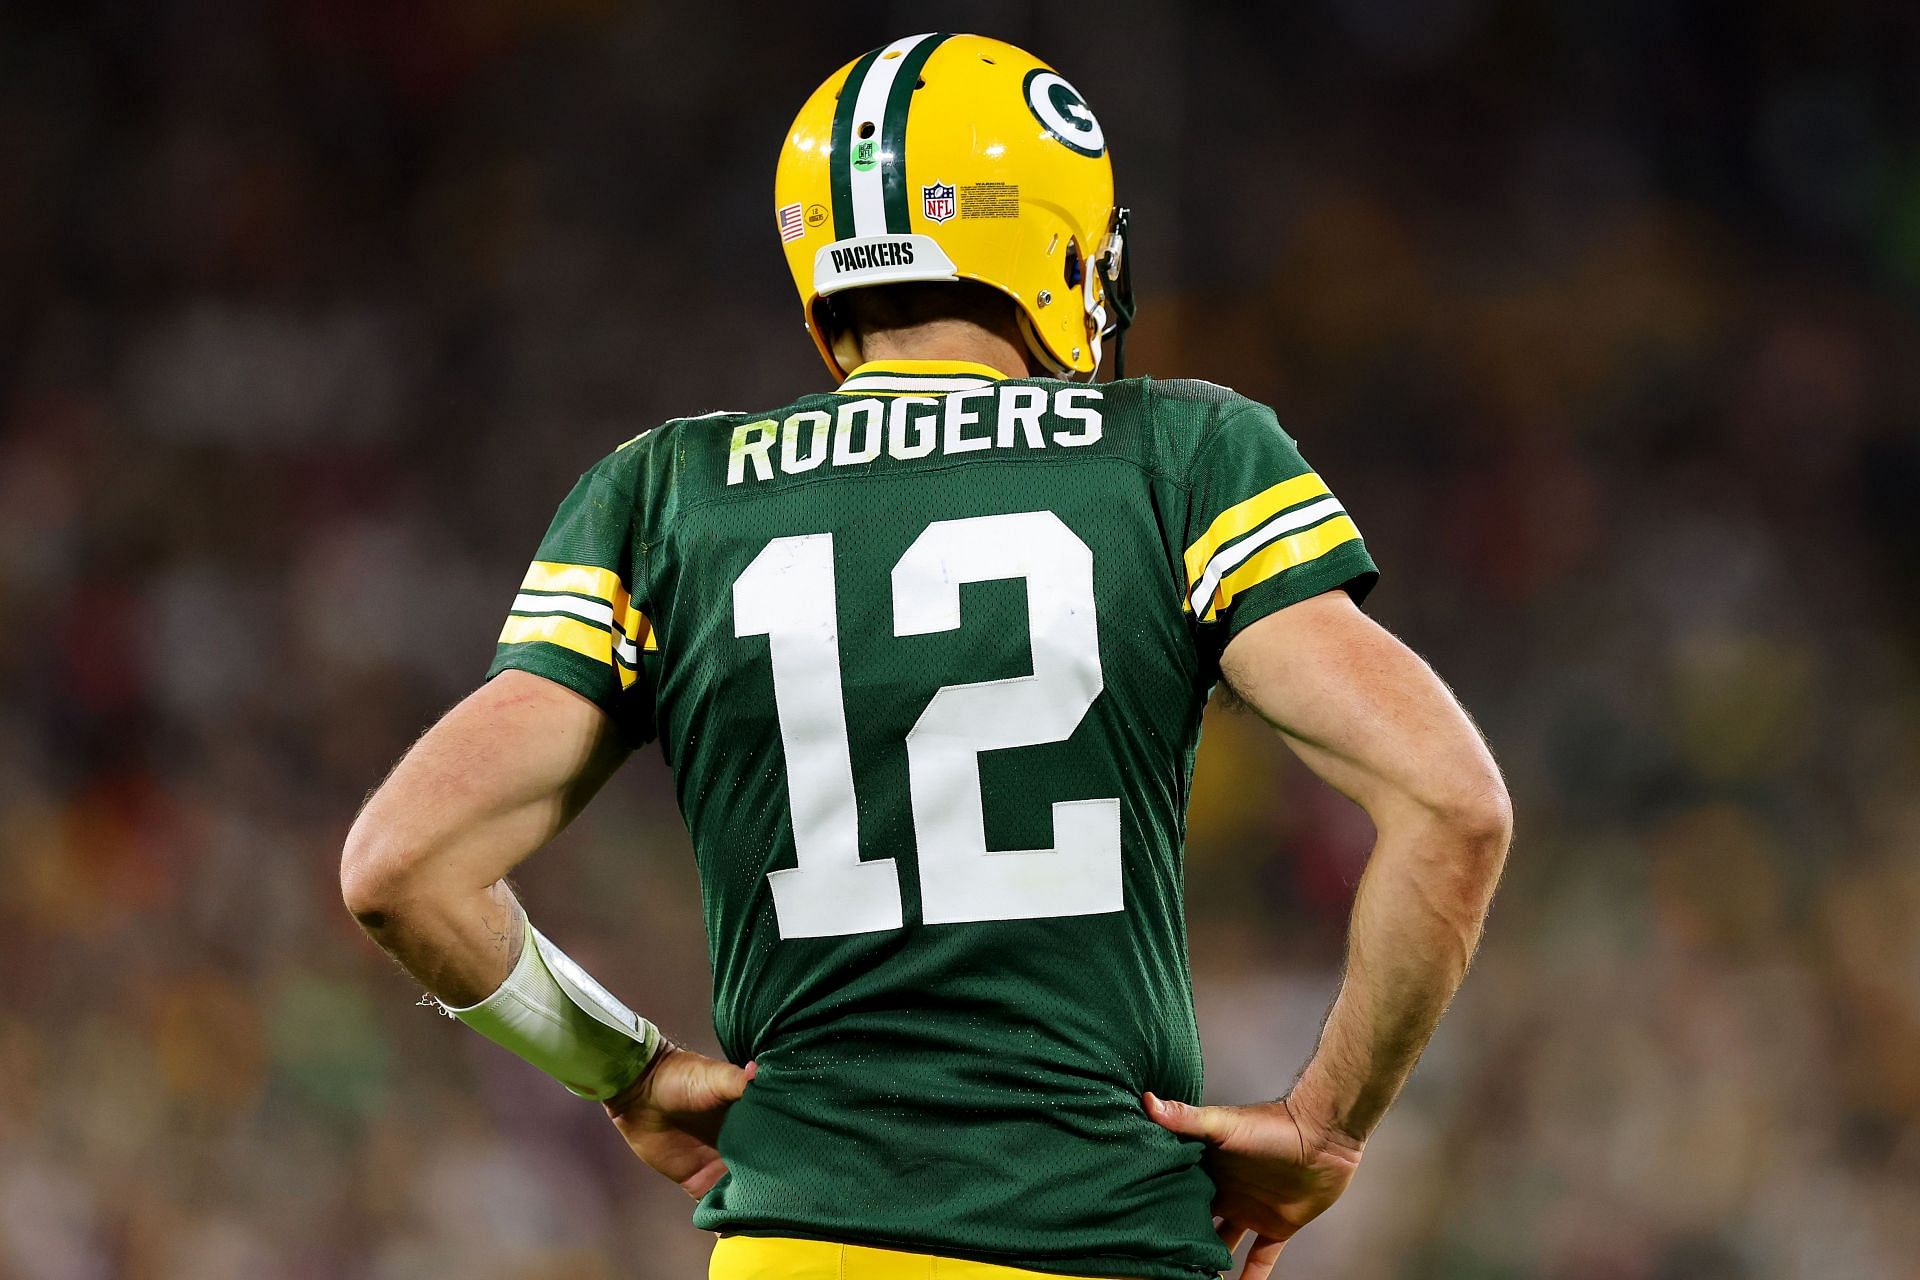 Aaron Rodgers, quarterback of the Green Bay Packers